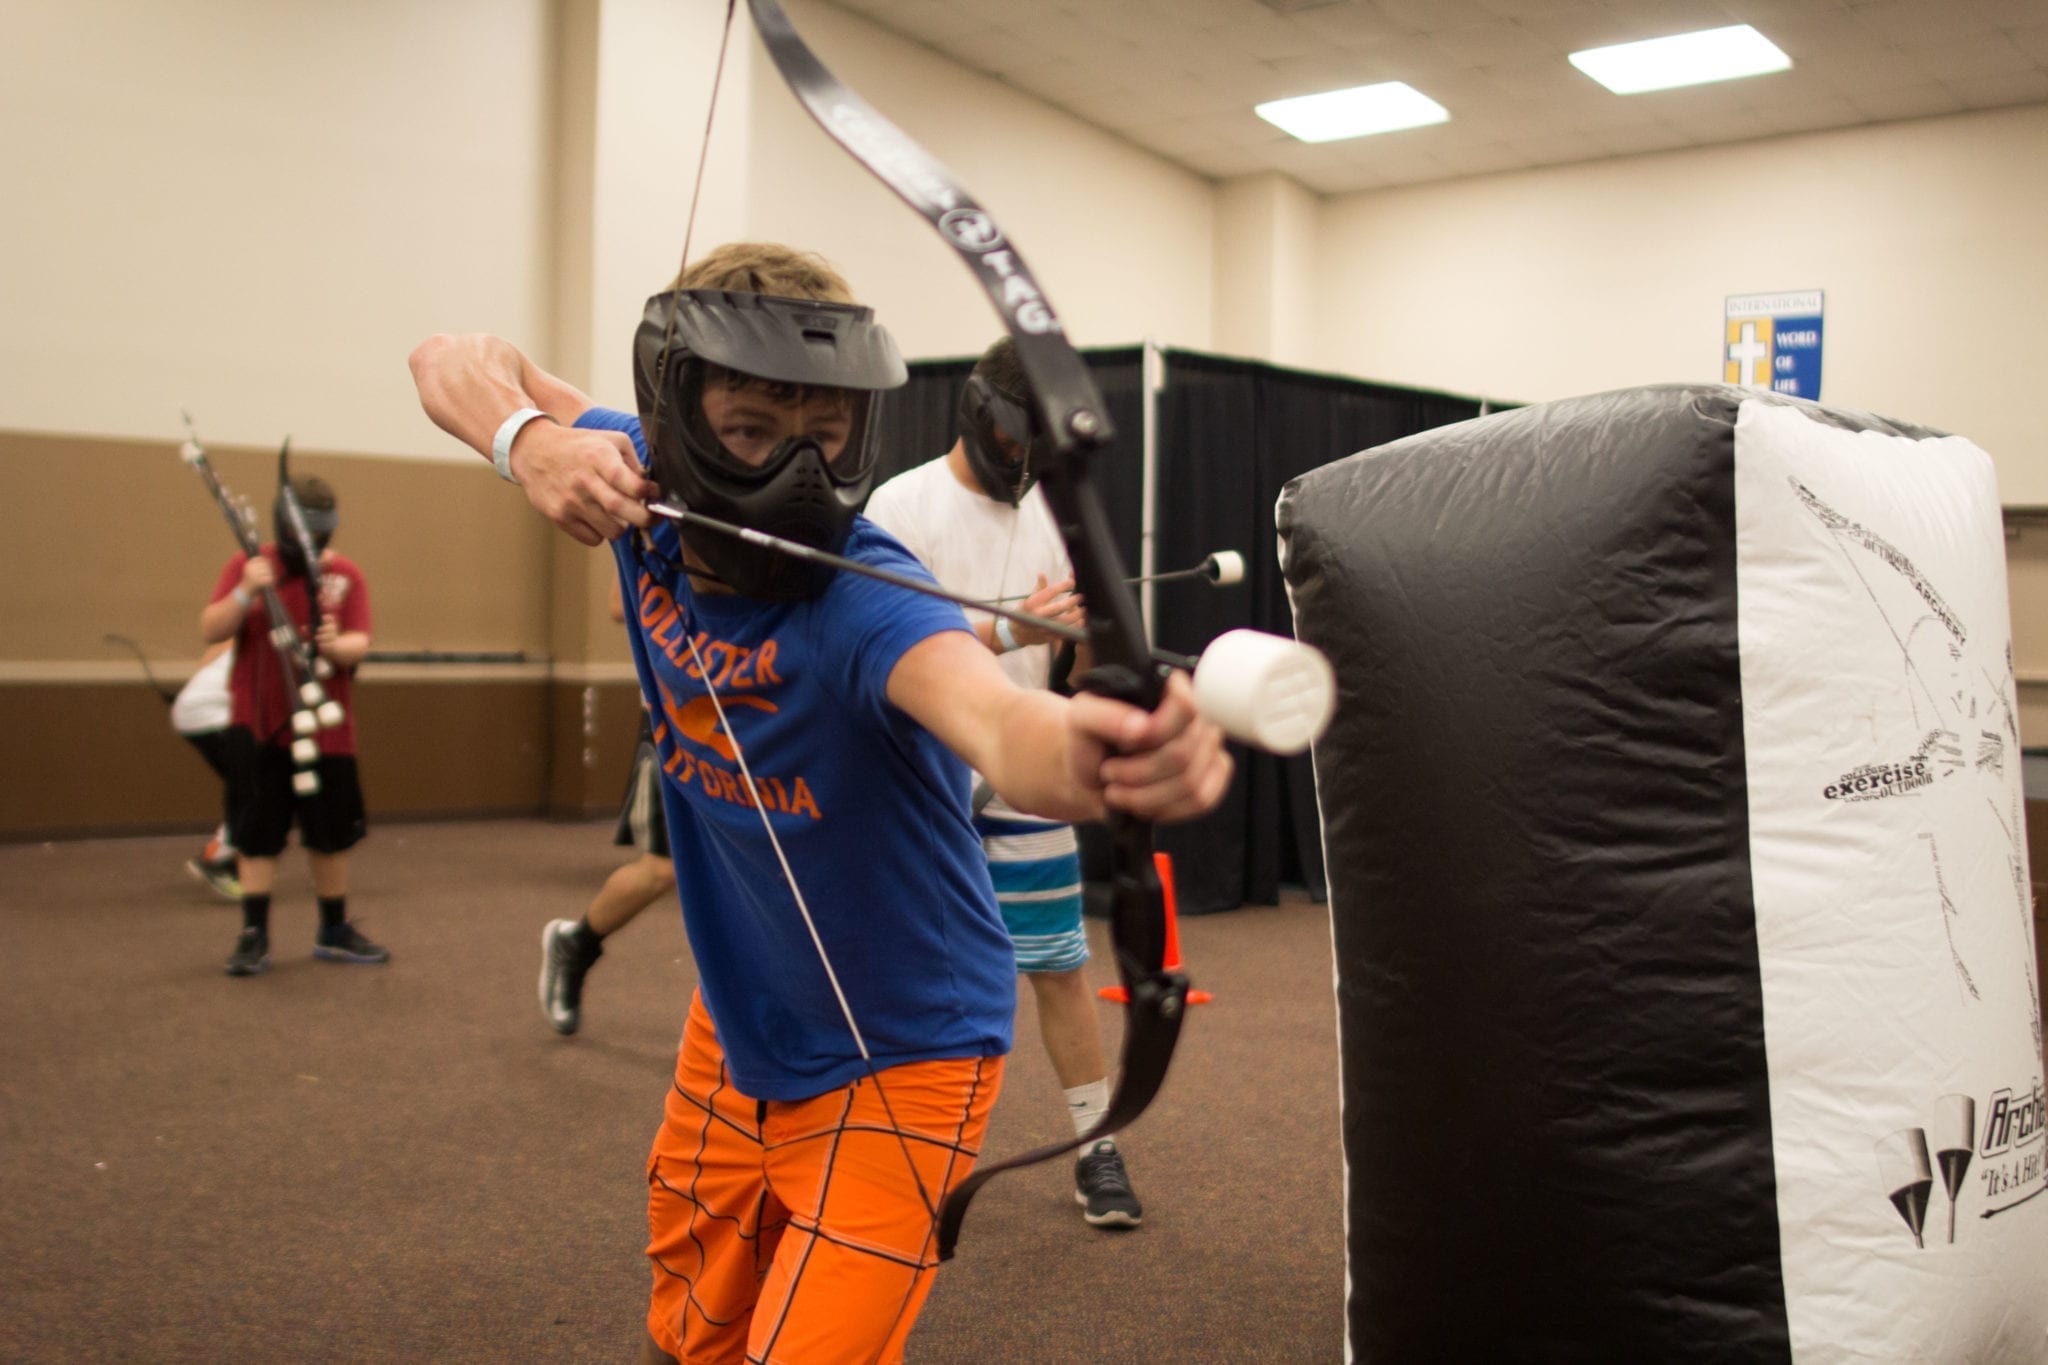 people playing archery tag indoors.